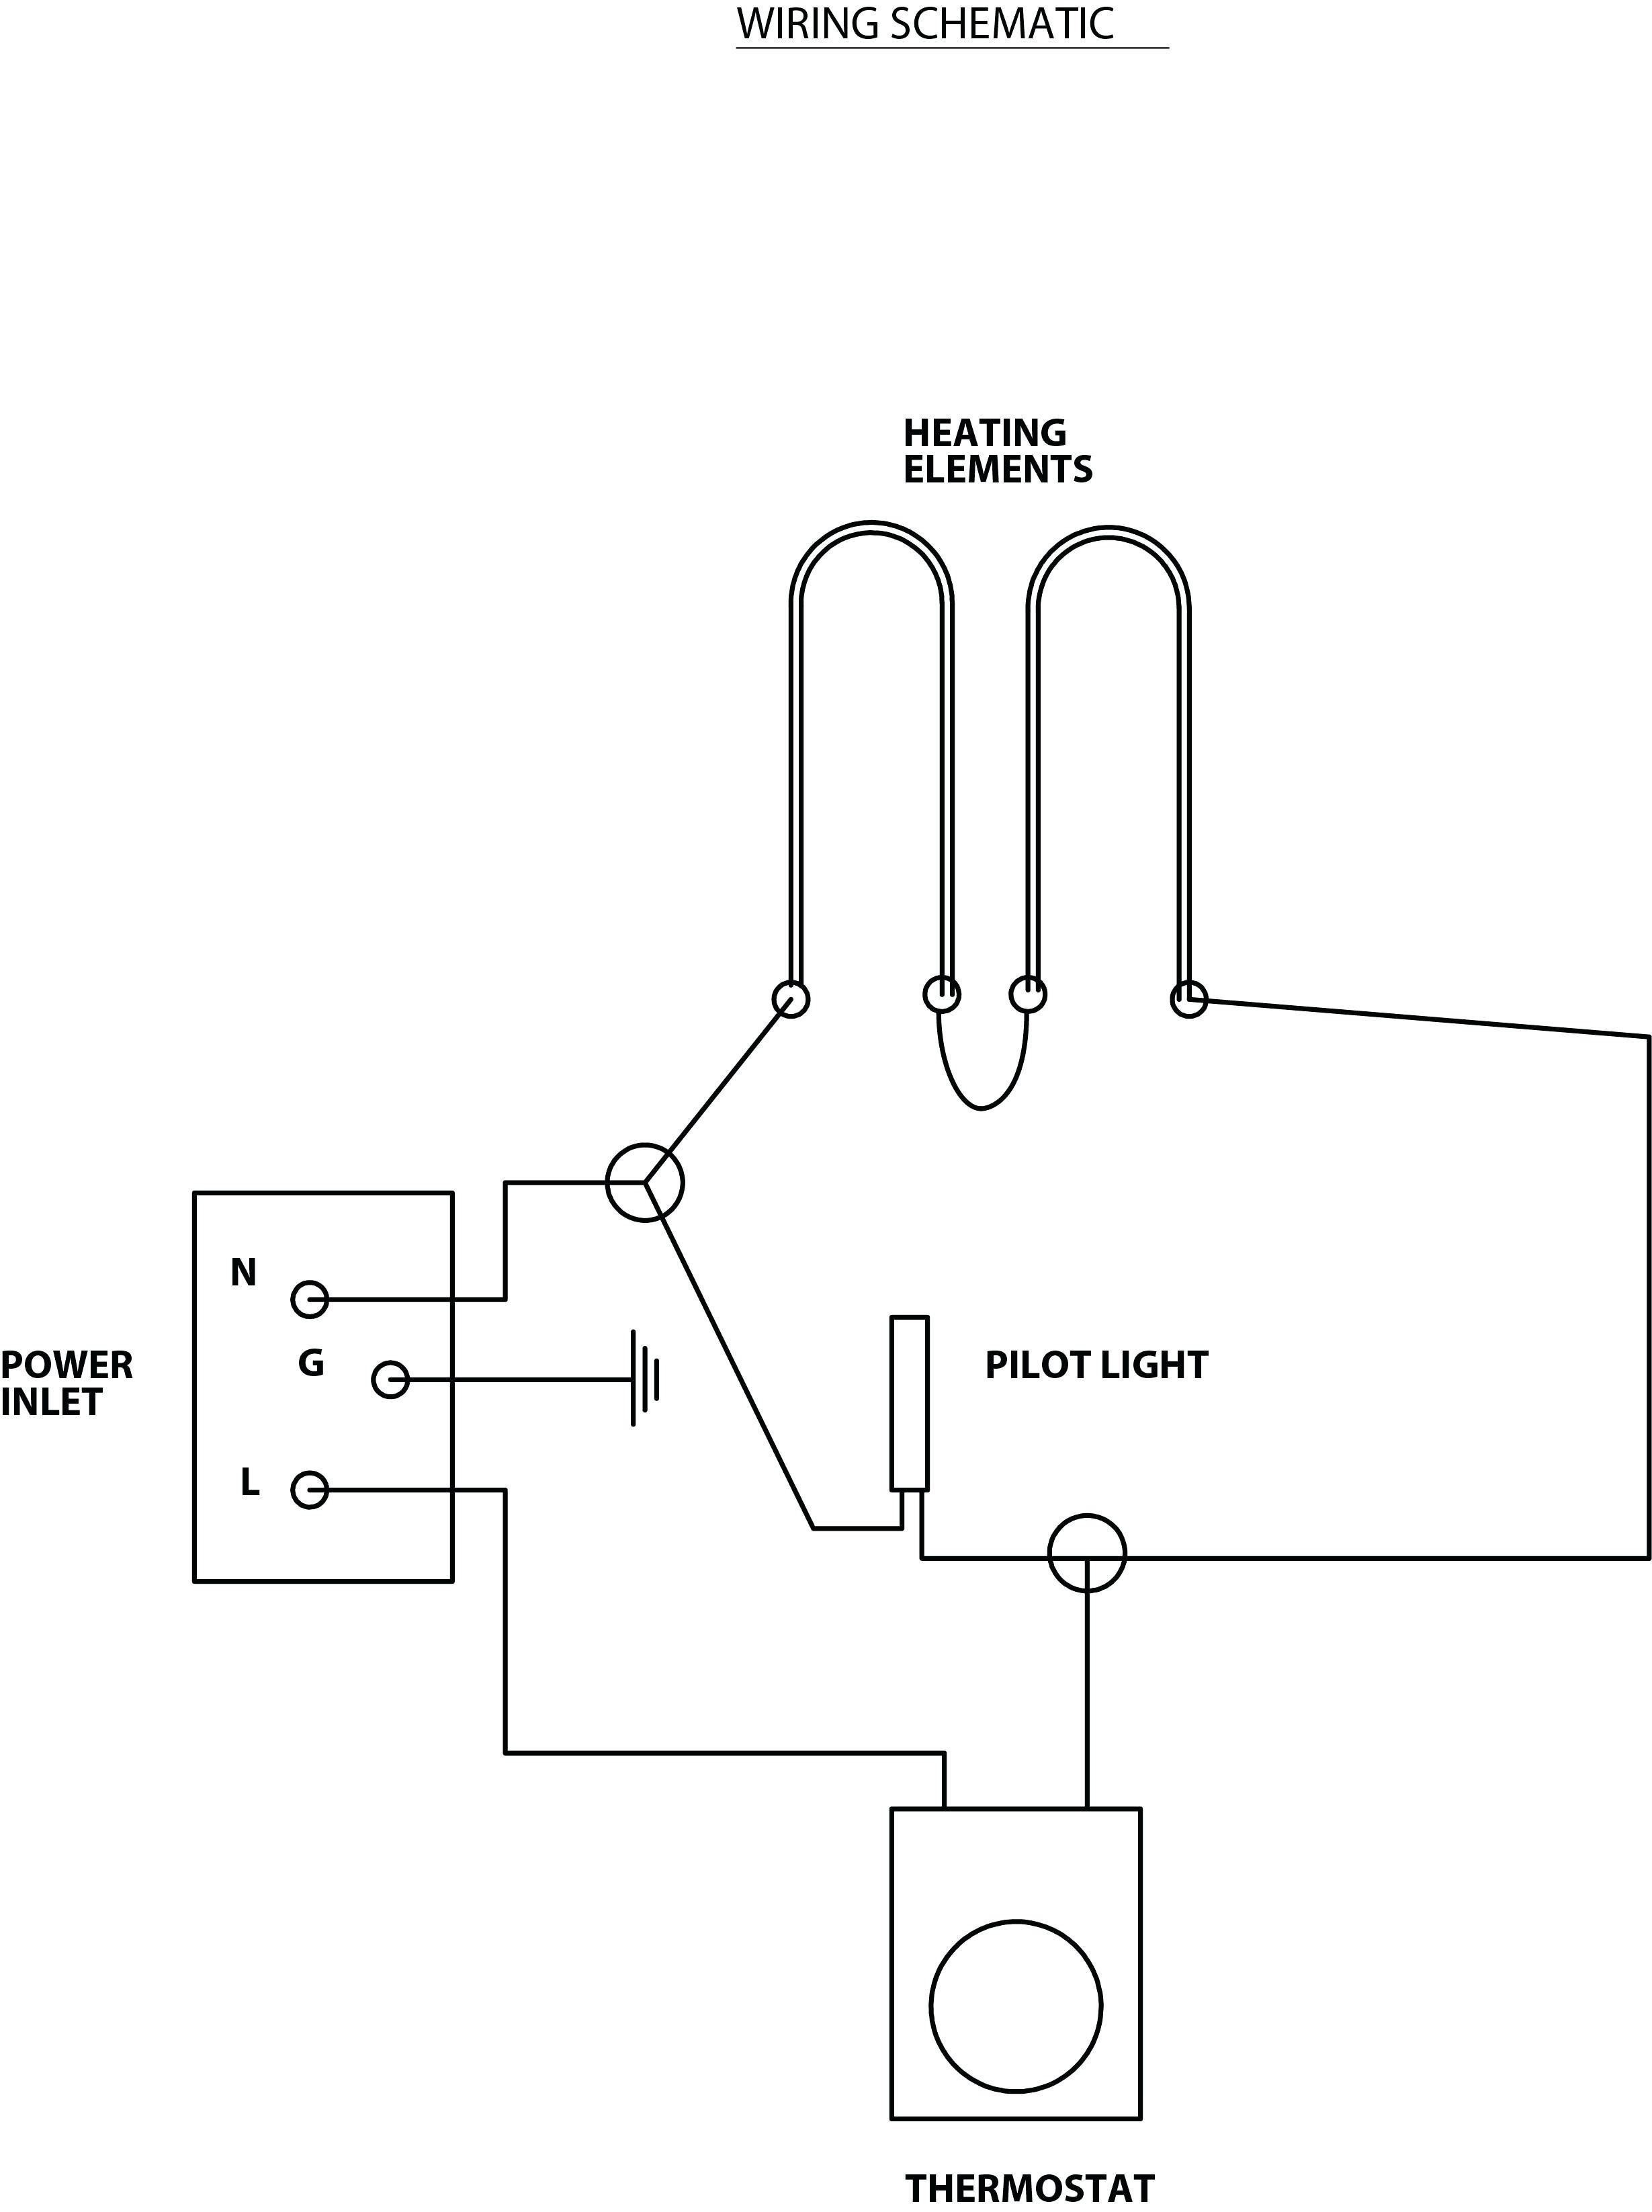 Wire Diagram for Inverter In A 2010 Tiffin Phaeton Car Wiring Diagrams software Of Wire Diagram for Inverter In A 2010 Tiffin Phaeton